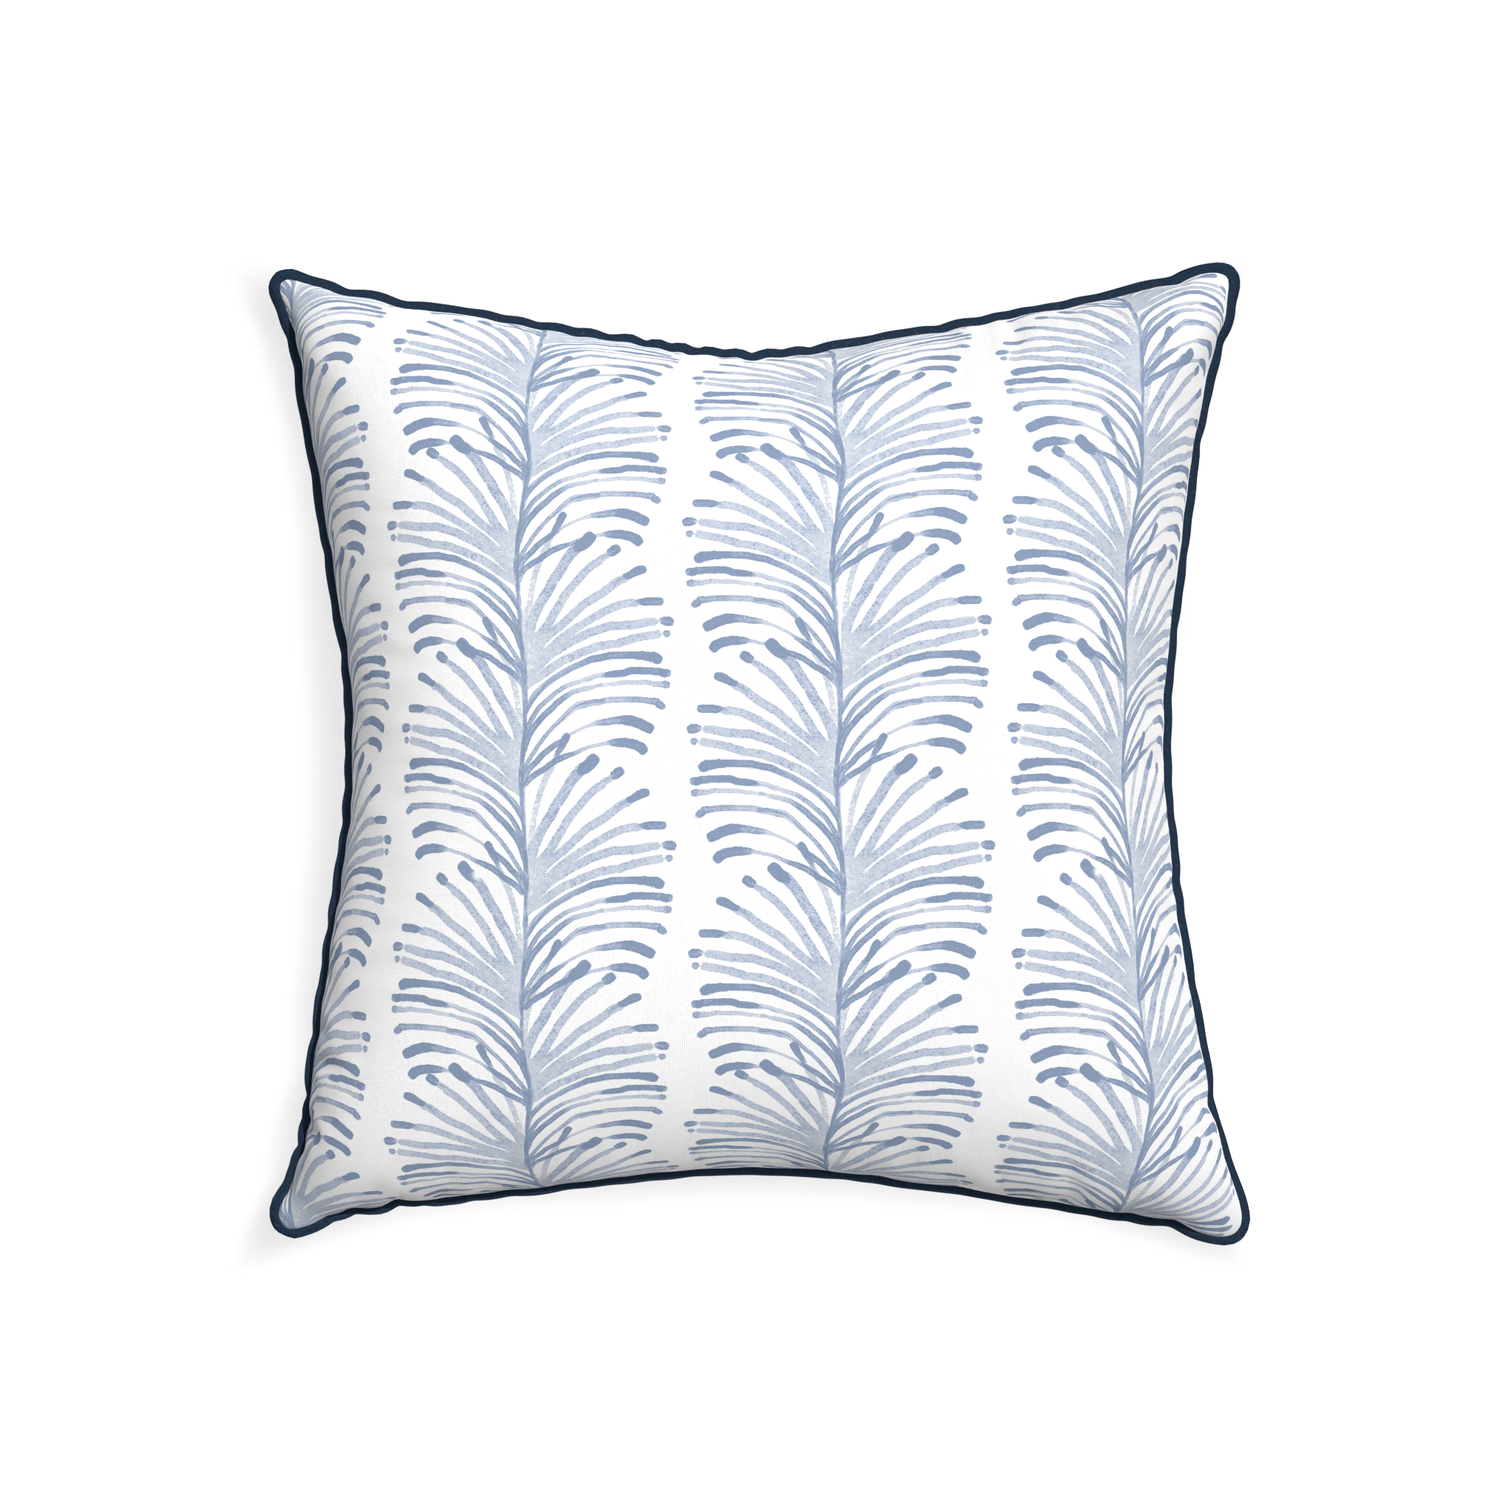 22-square emma sky custom sky blue botanical stripepillow with c piping on white background